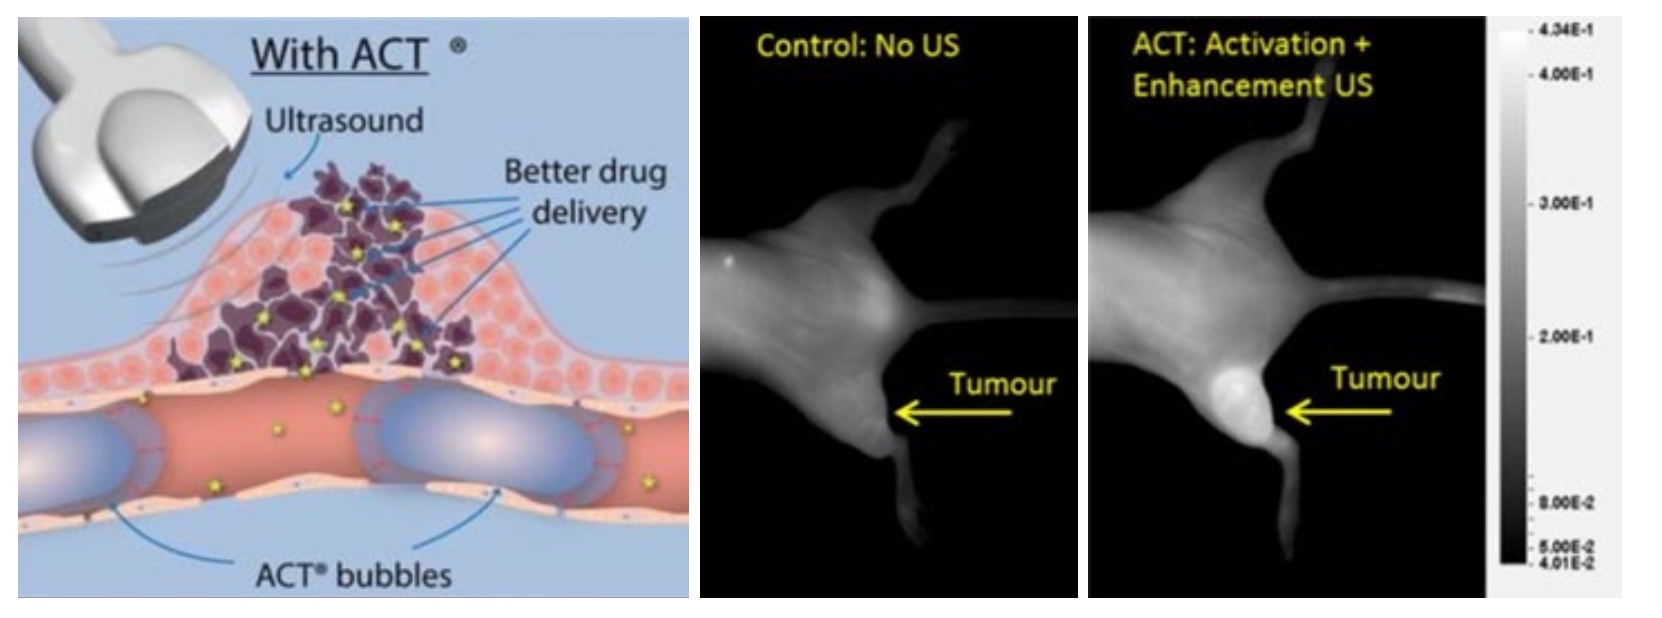 Figure 1: ACT works locally by aiming ultrasound directly at the tumor and activating systemically injected microcluster. To the right it can be seen how ACT can increase the delivery of a fluorescent model drug in a tumor on the leg of a mouse (Wamel 2016).